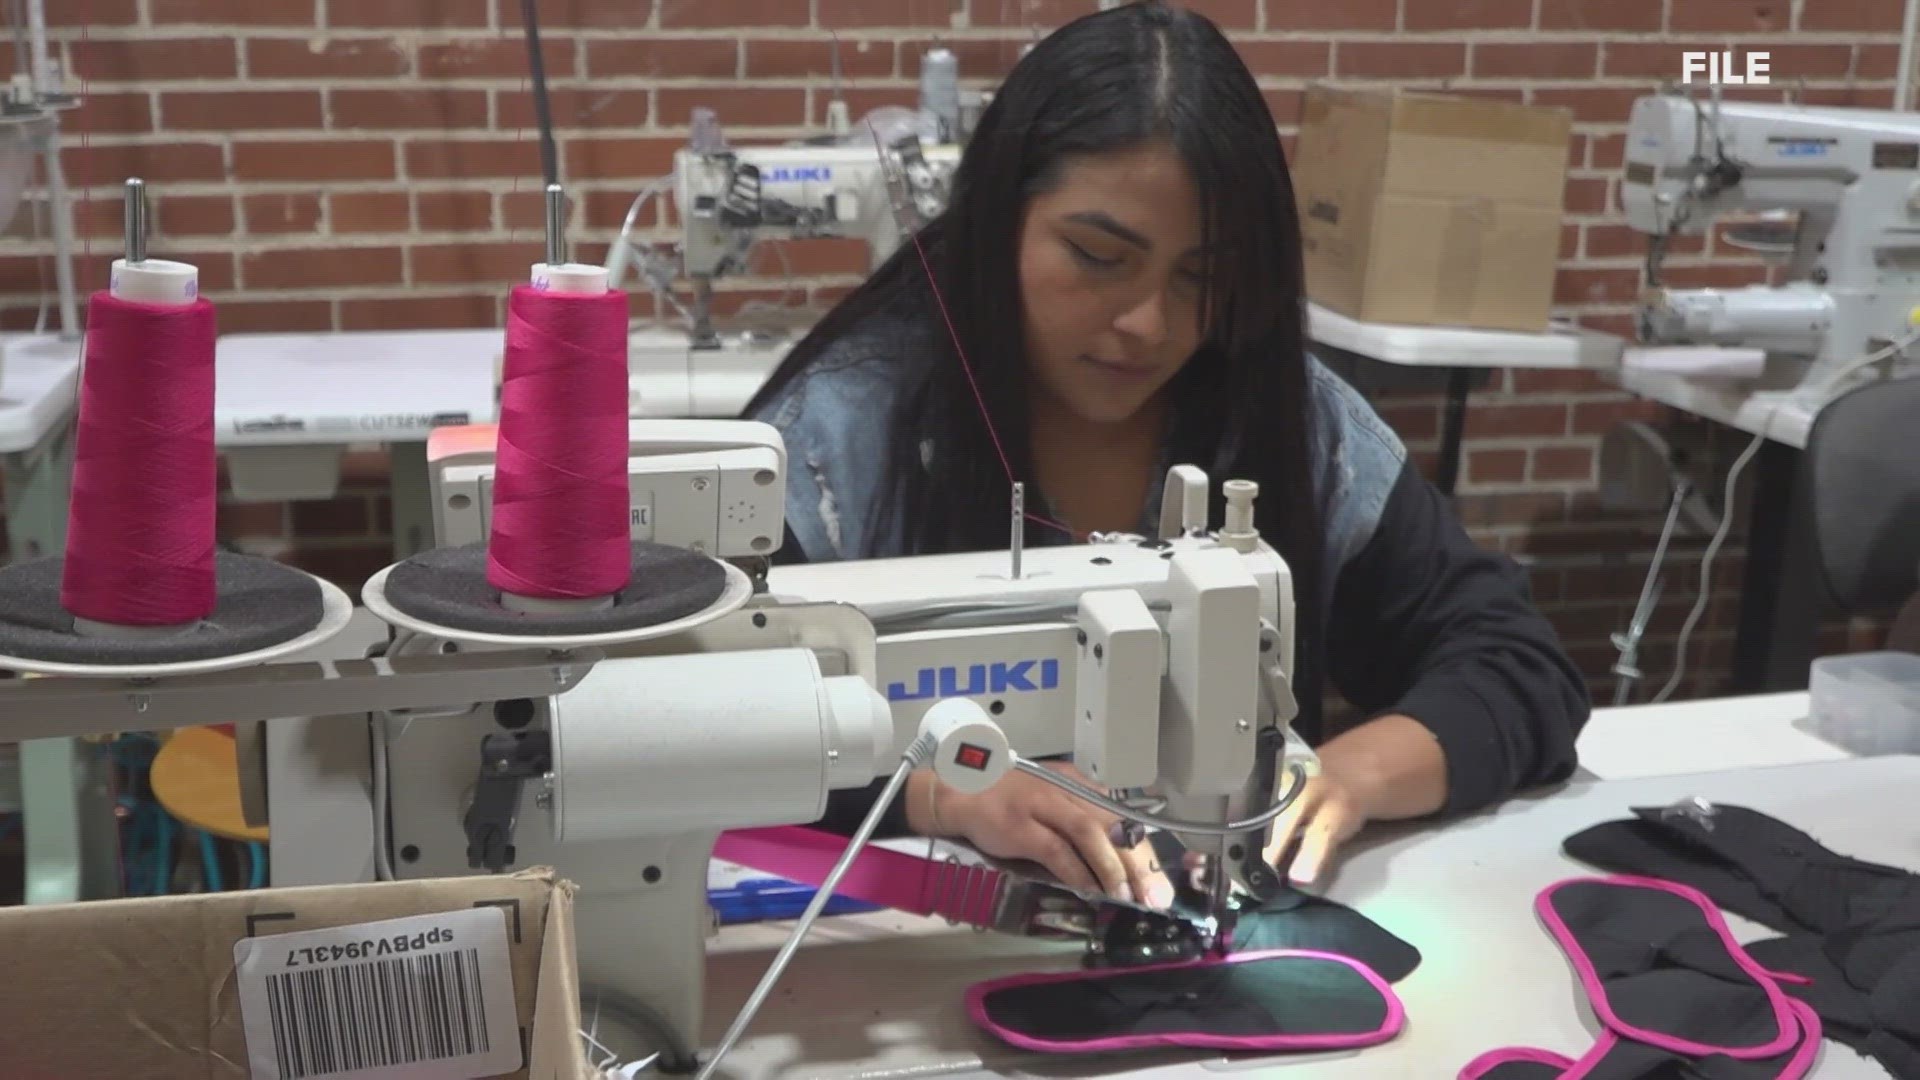 The Jefferson County Library in Arnold is hosting a free sewing workshop Wednesday. The library district hosts a few different types of crafting workshops.